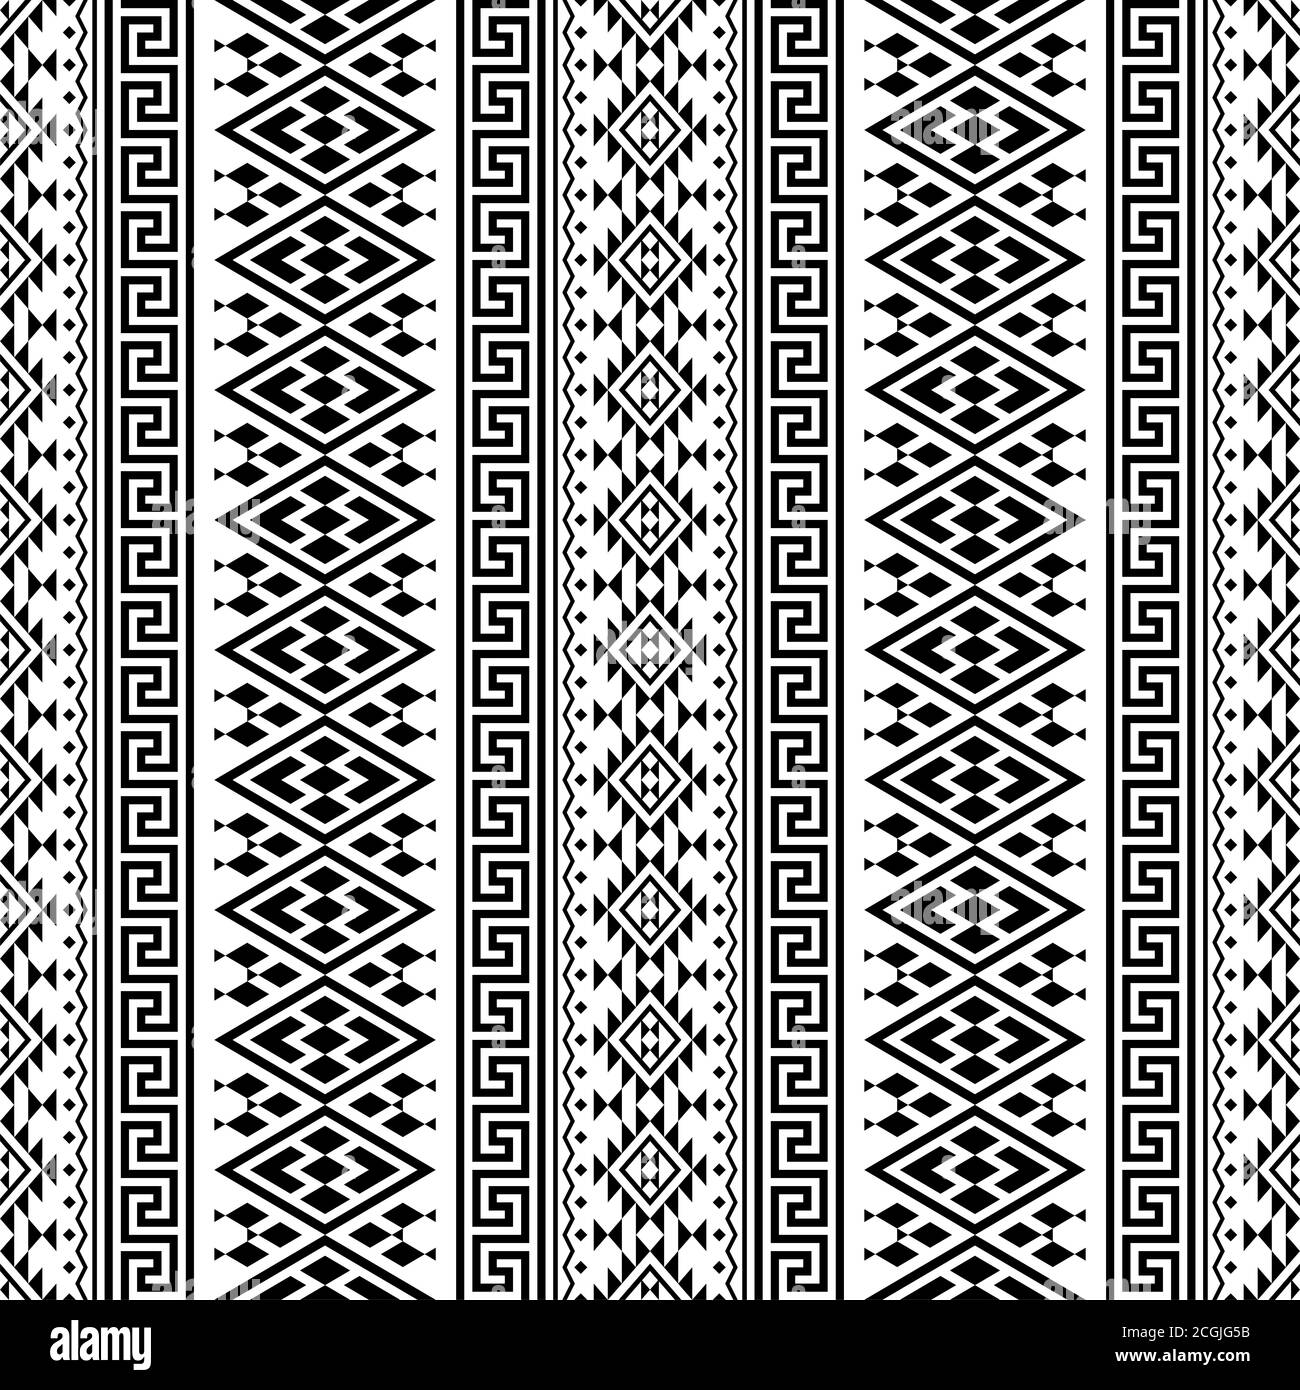 Seamless ethnic pattern texture background design vector in black white ...